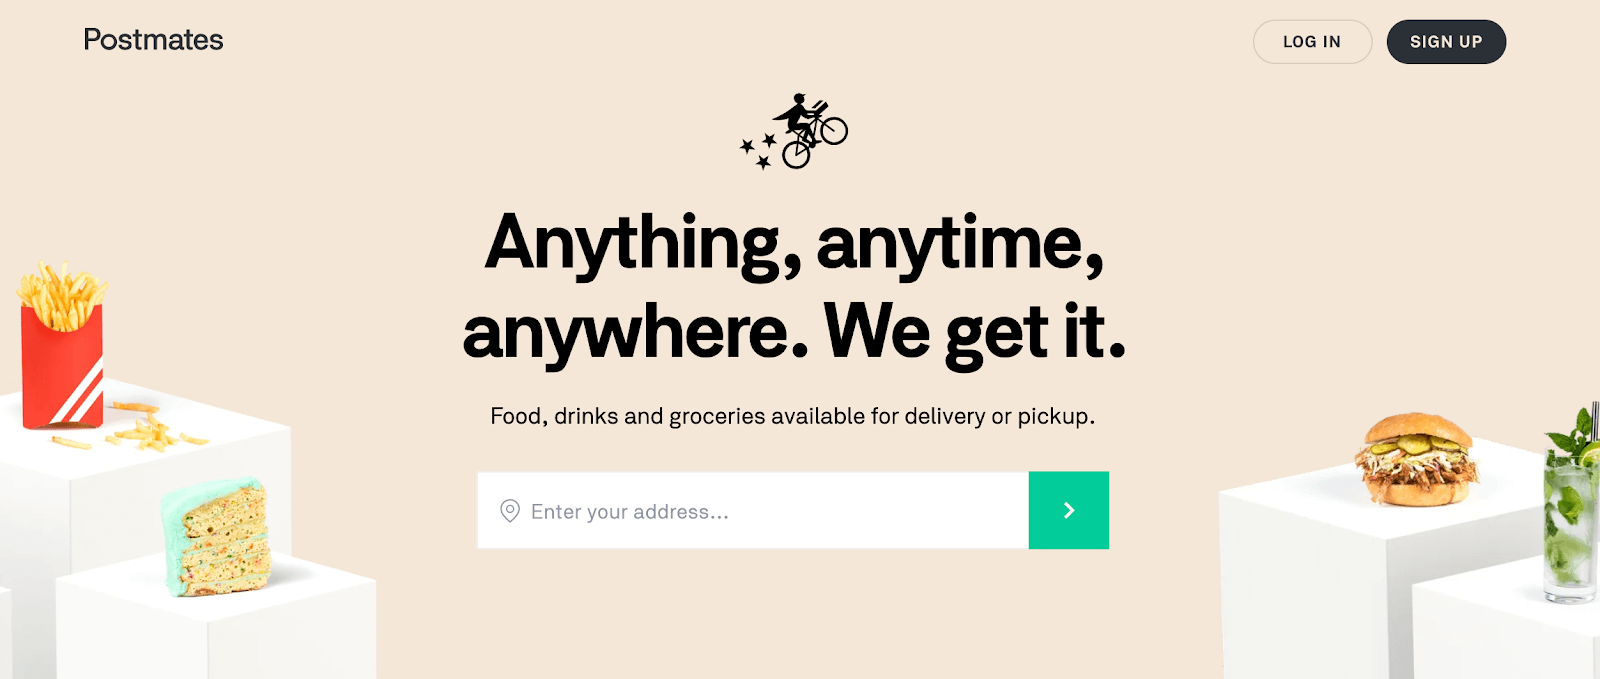 postmates background check homepage